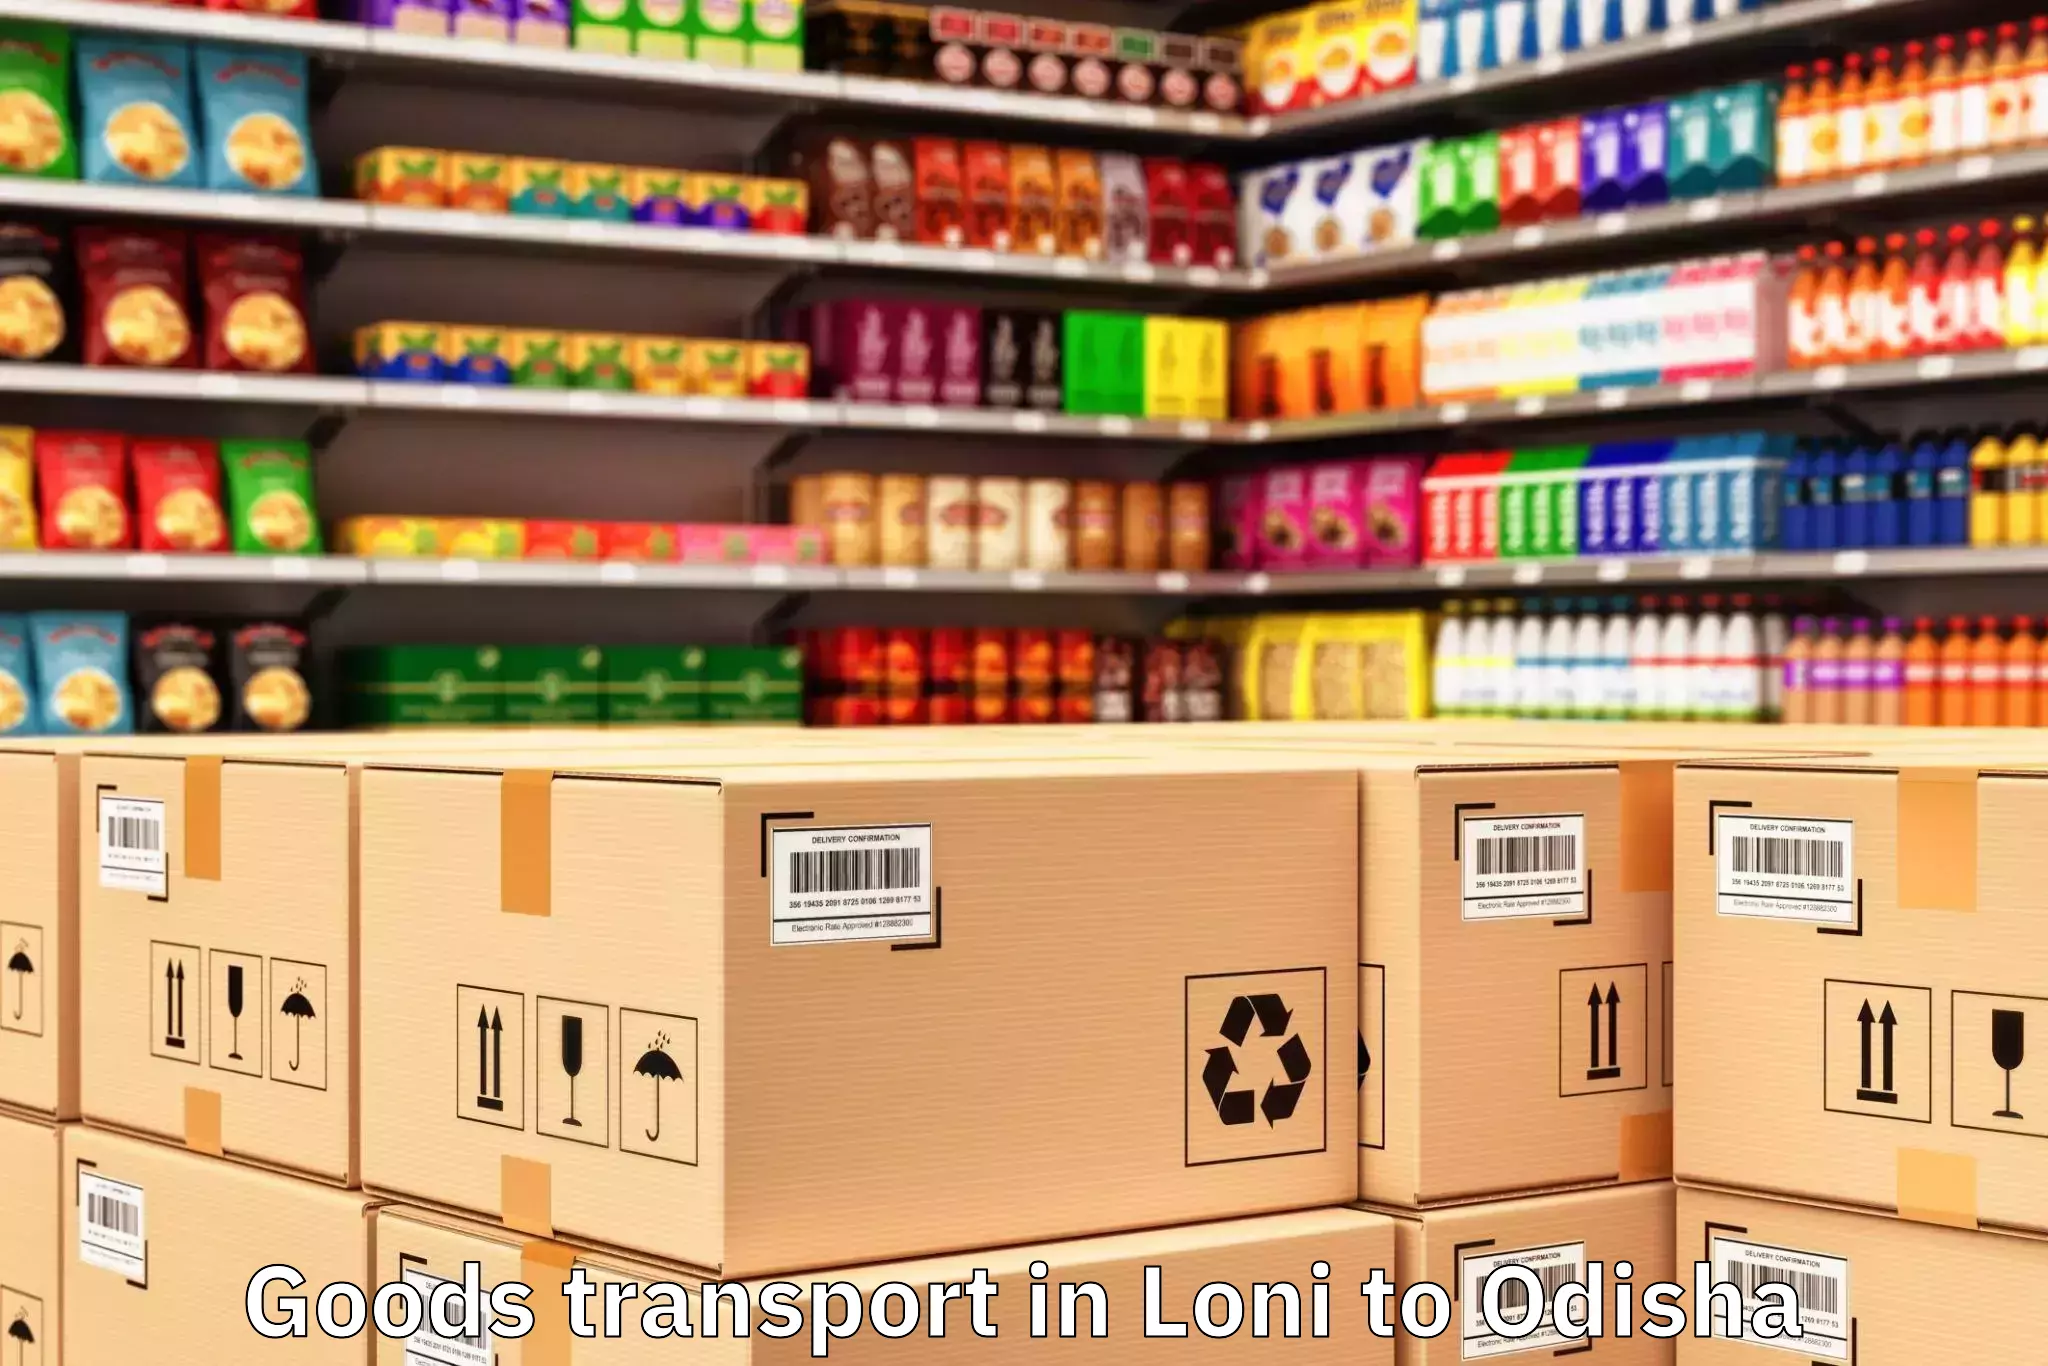 Discover Loni to Sinapali Goods Transport